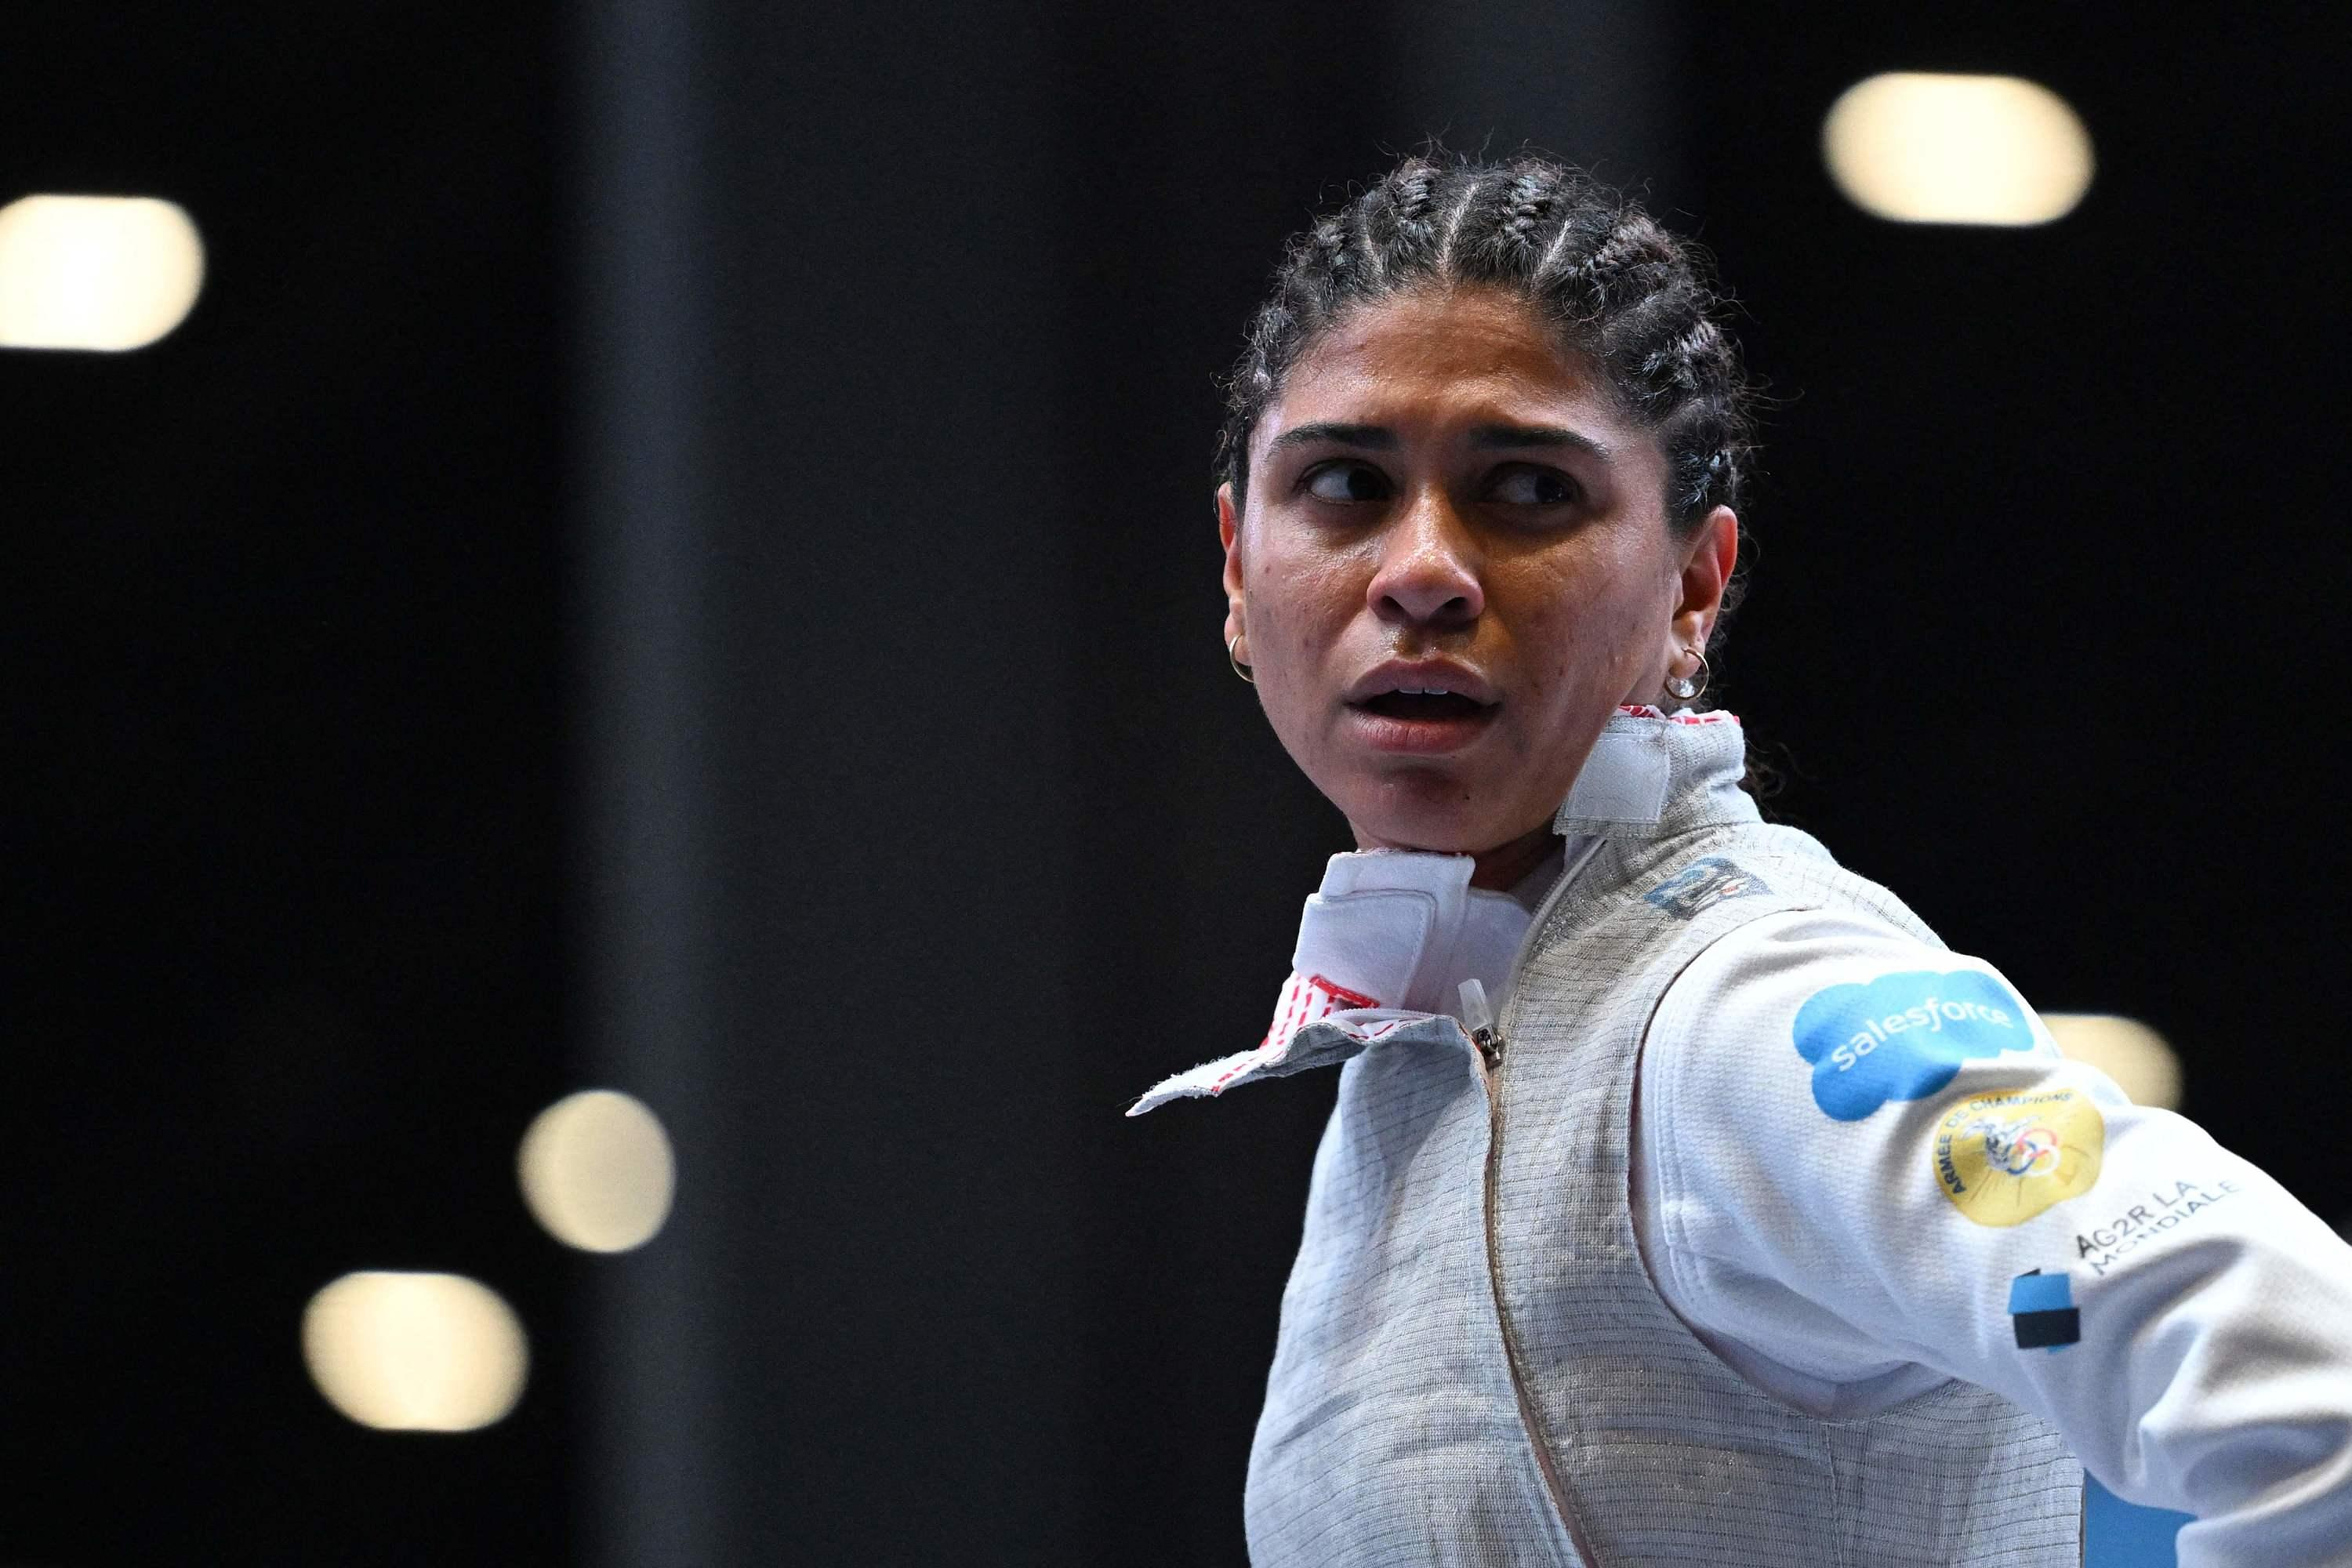 Paris 2024 Olympics: suspended for doping, fencer Thibus says she was “exposed by contamination”